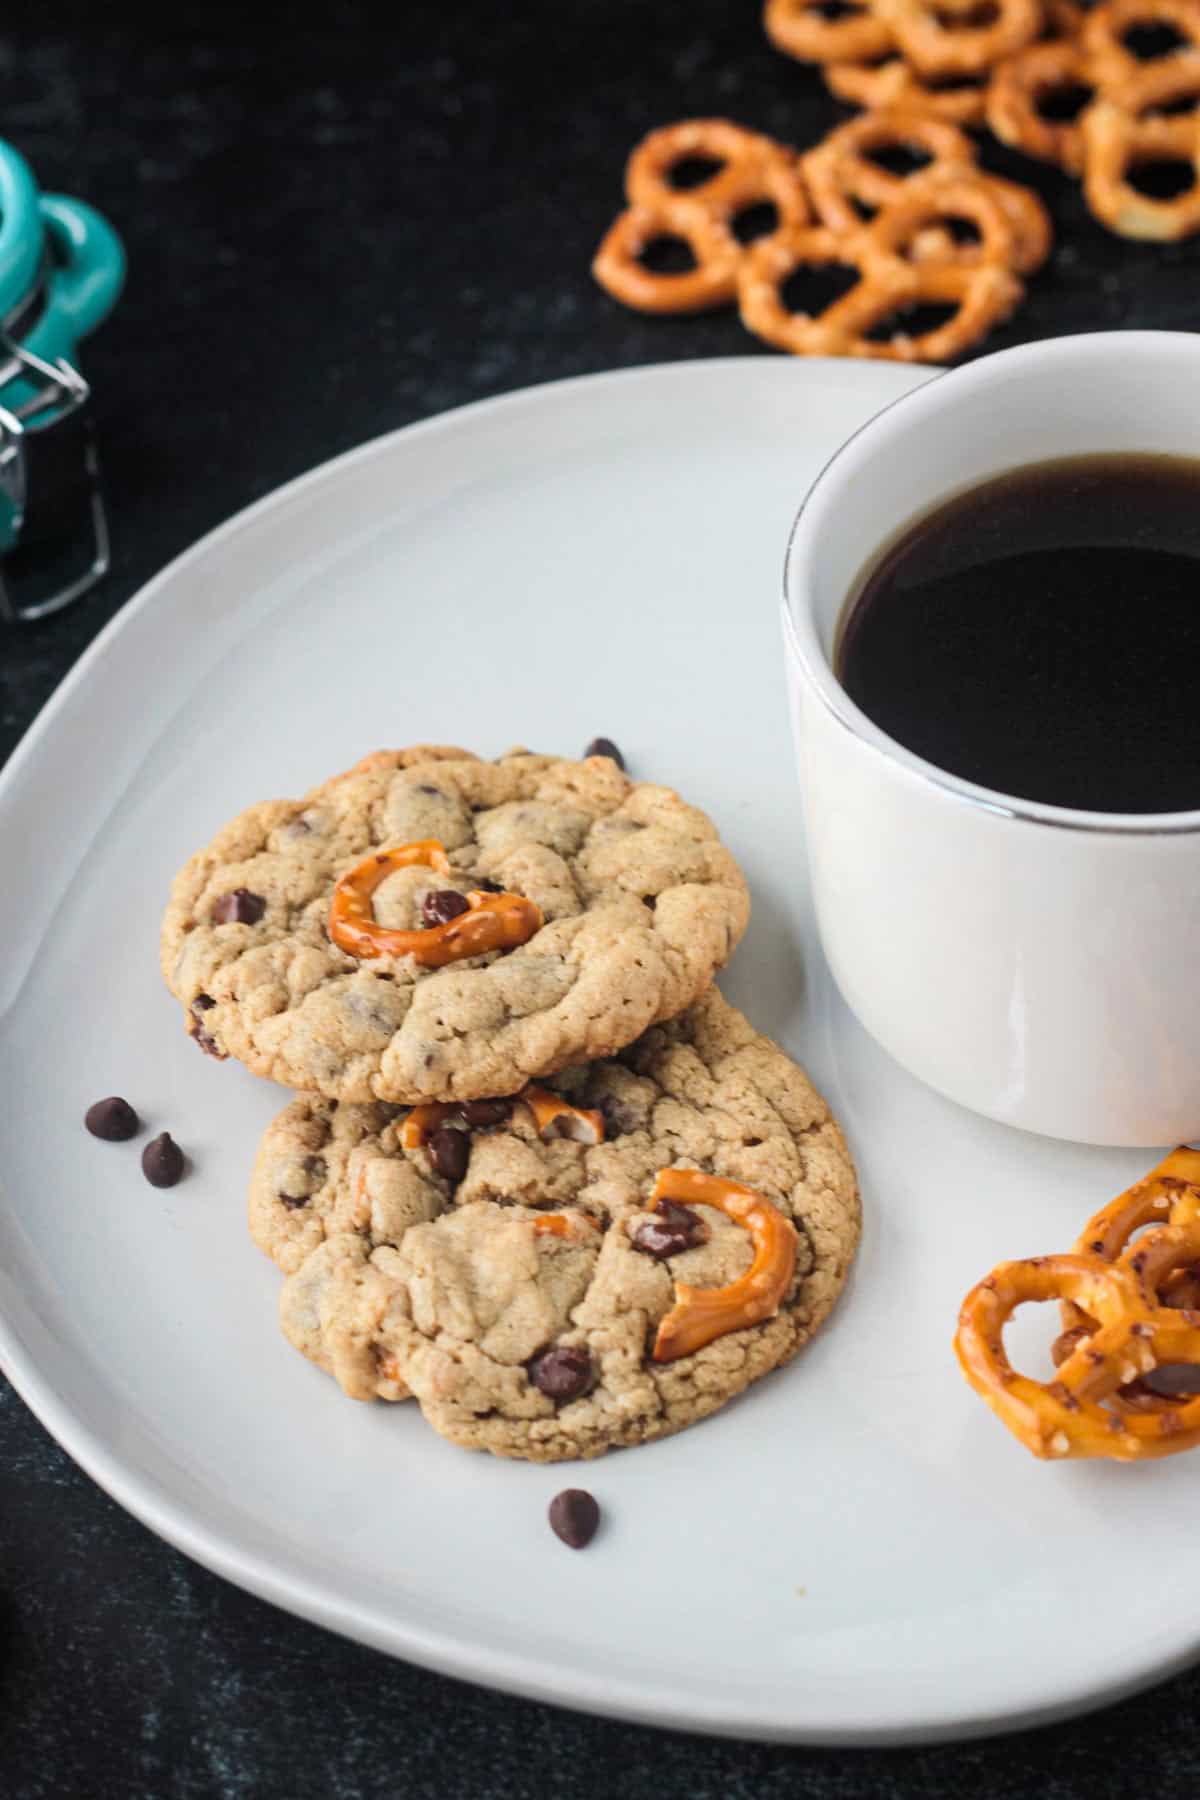 Two chocolate chip pretzel cookies on a plate.